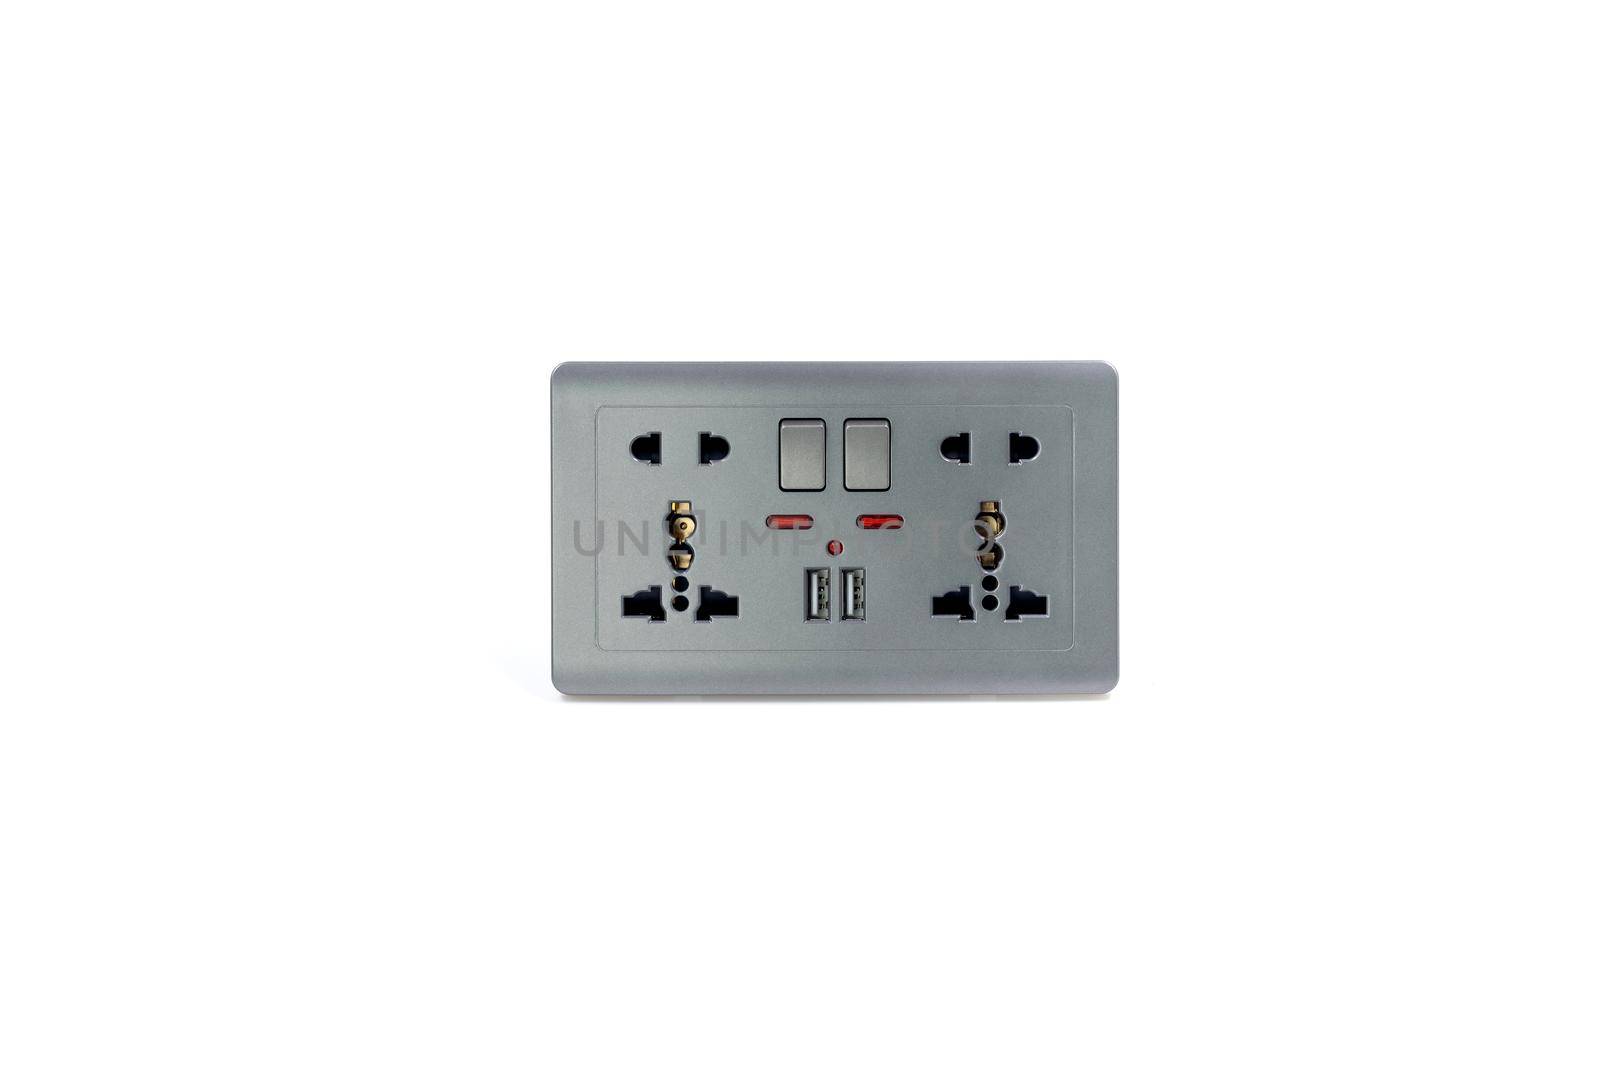 Universal wall outlet AC power plug with USB 5.0V DC output socket for charger isolated on white background. by wattanaphob